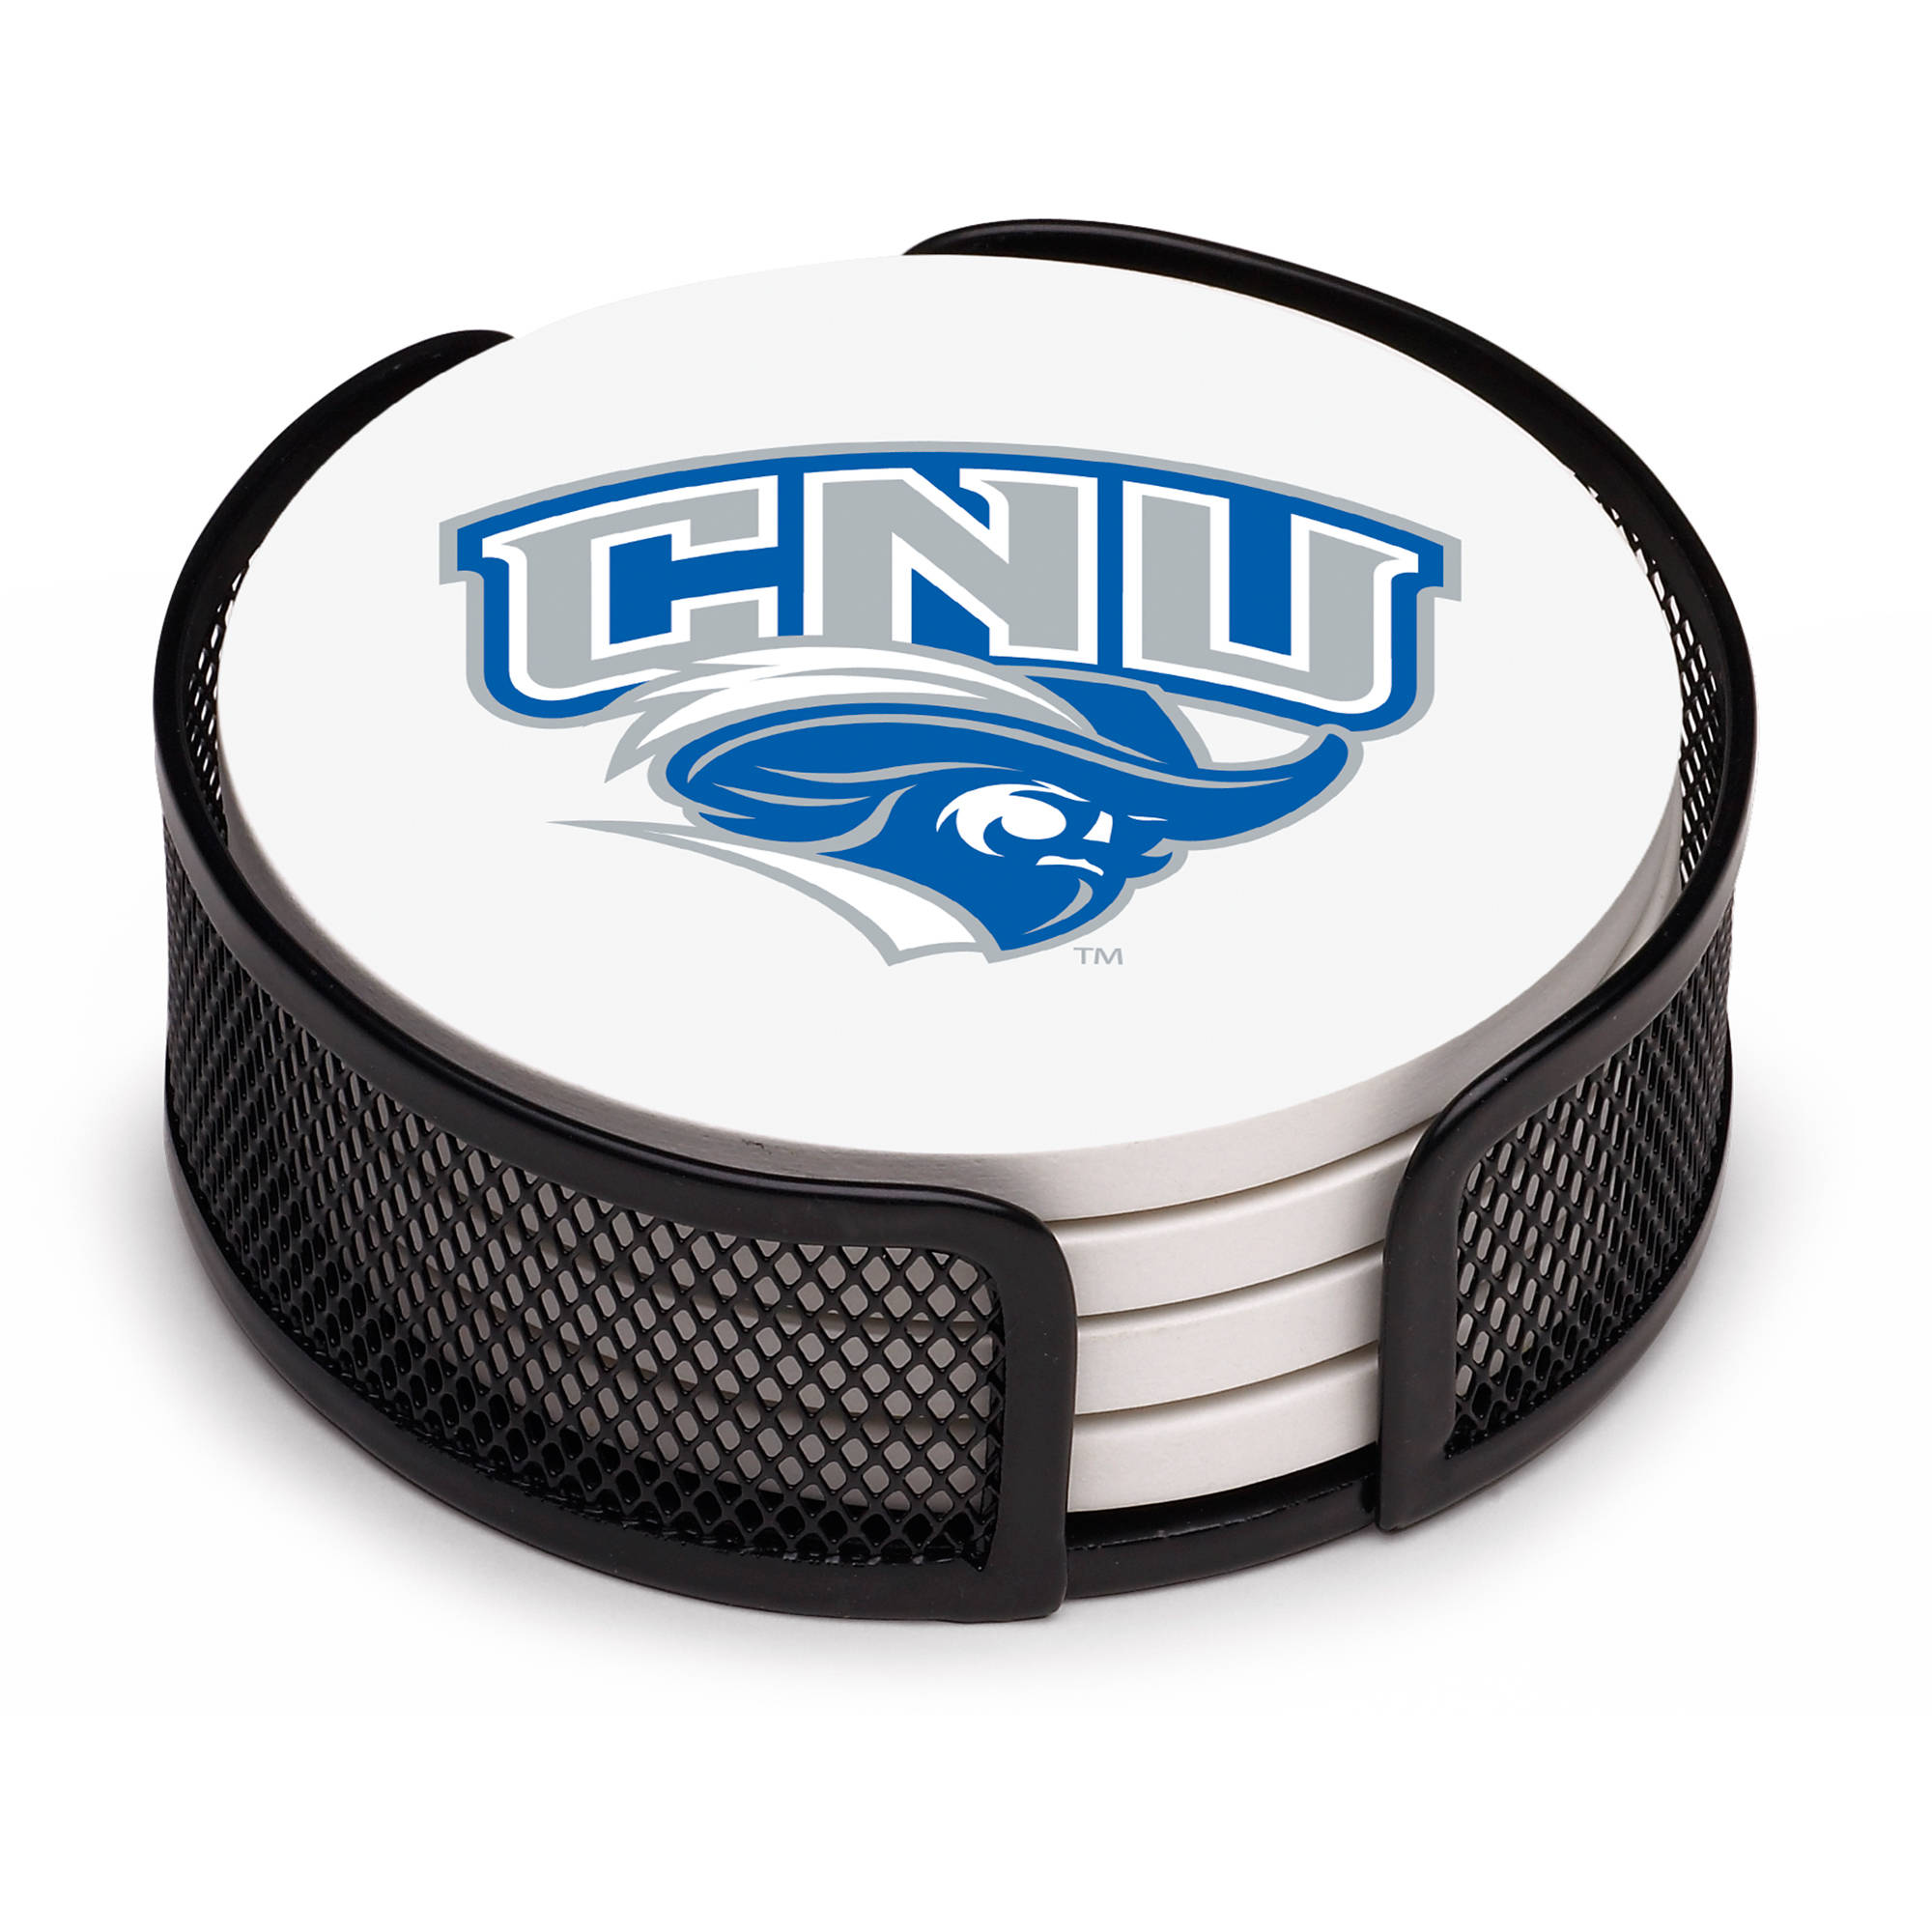 Stoneware Drink Coaster Set with Holder Included, Christopher Newport University - image 1 of 1